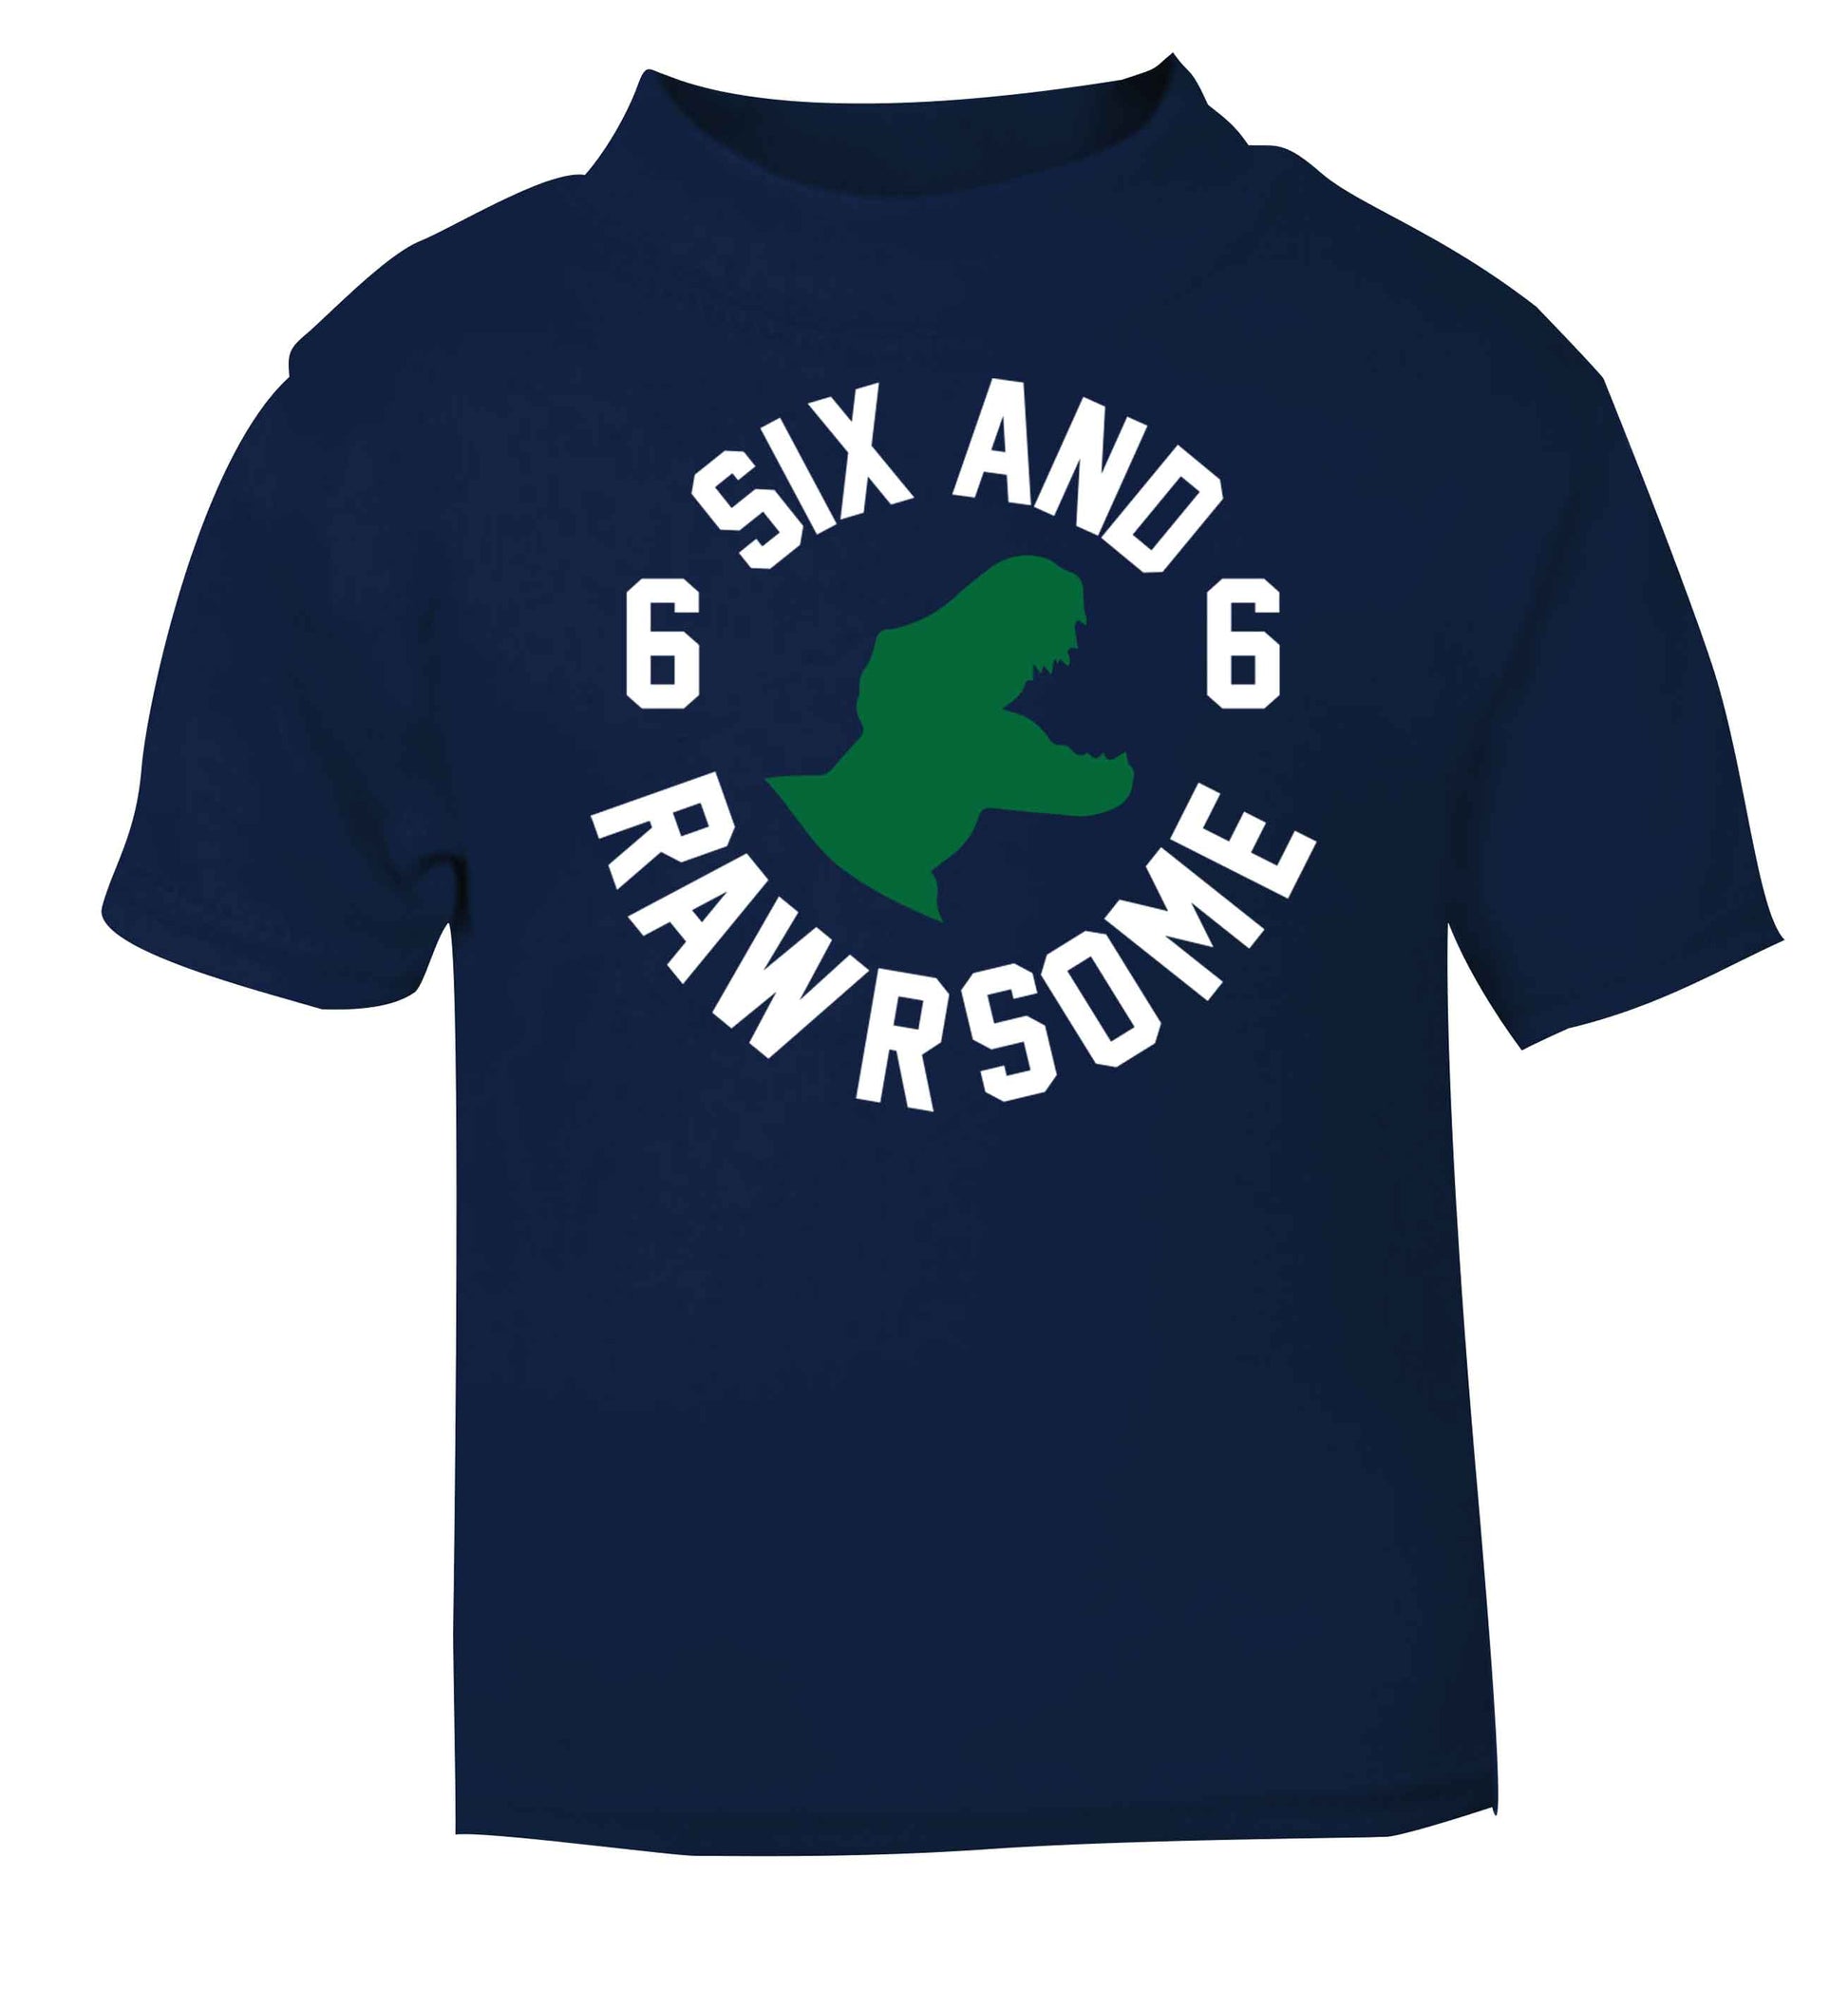 Six and rawrsome navy baby toddler Tshirt 2 Years